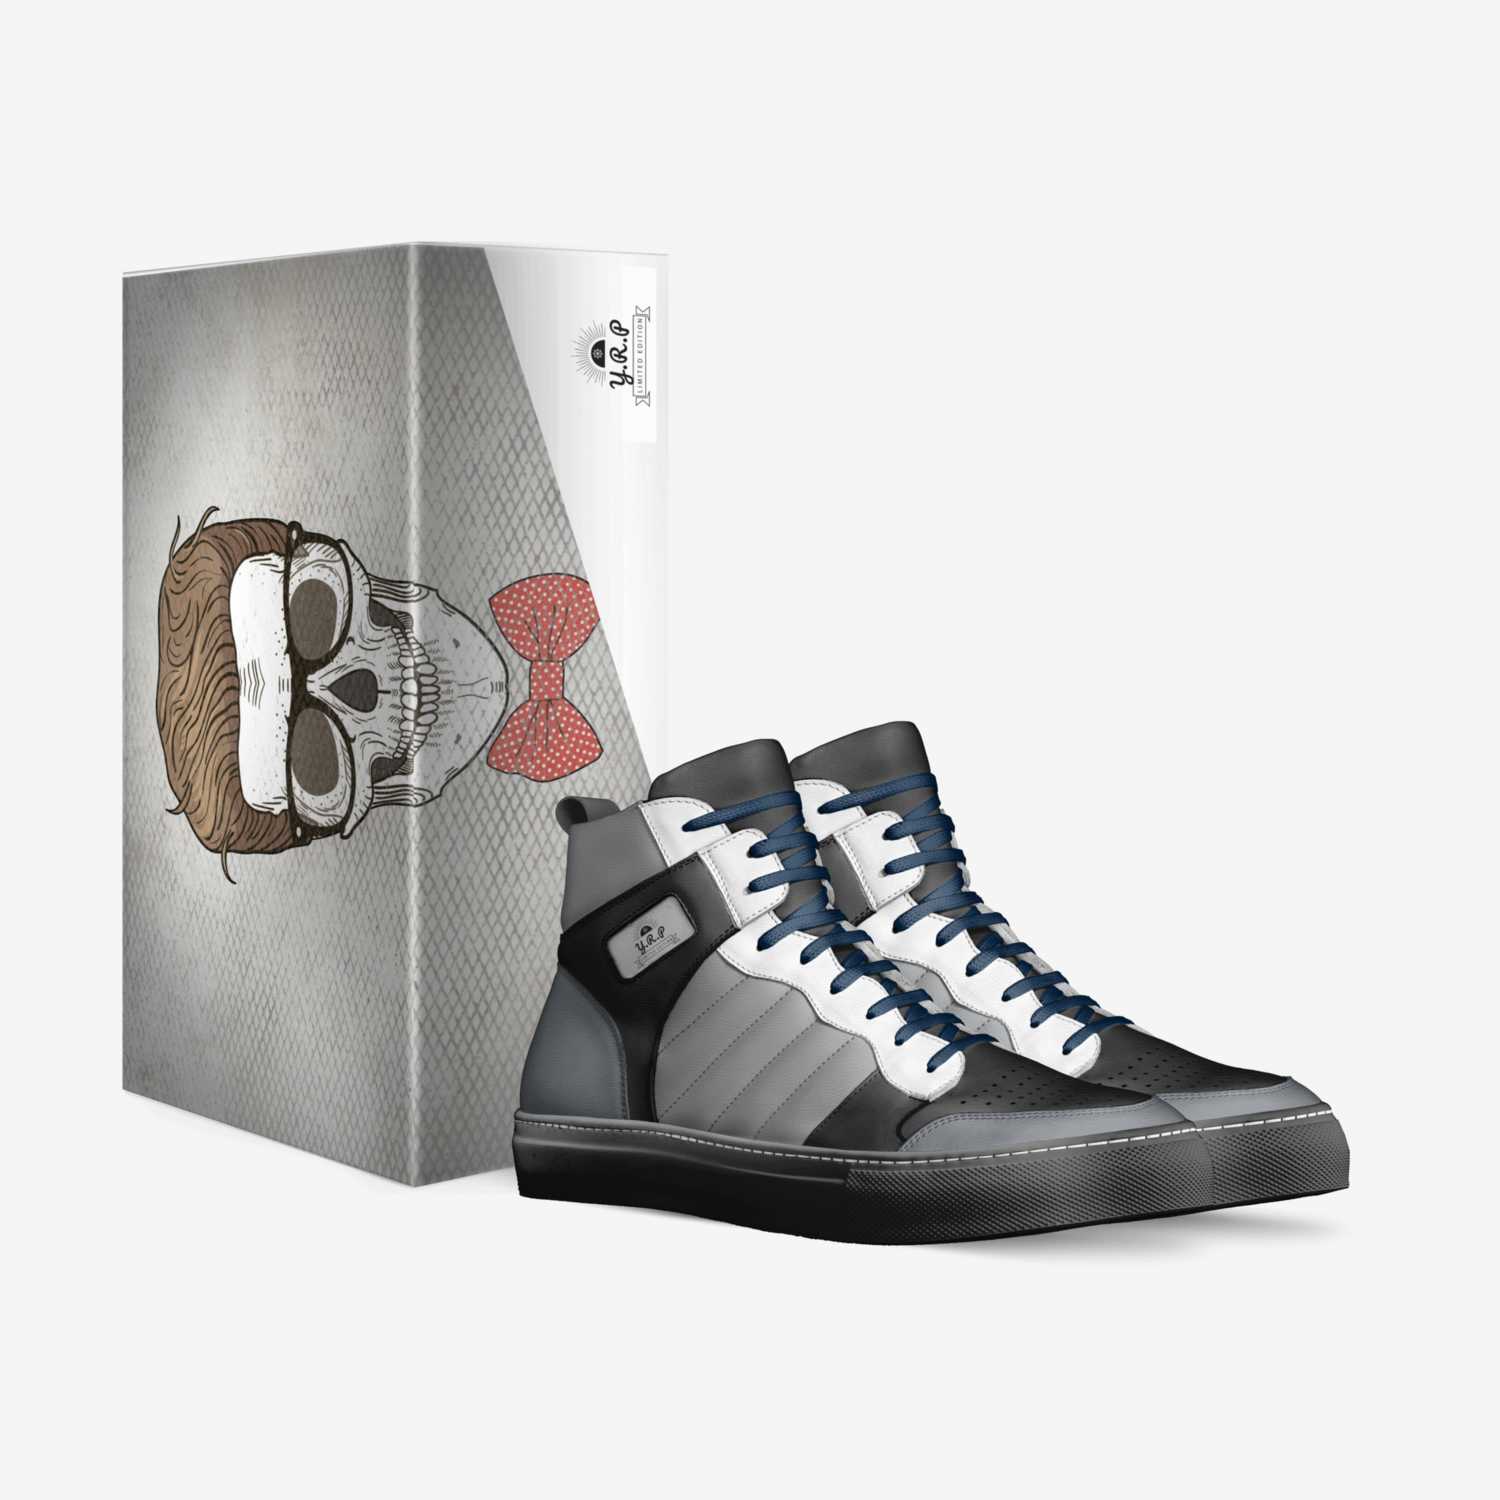 Y.R.P custom made in Italy shoes by Pump | Box view